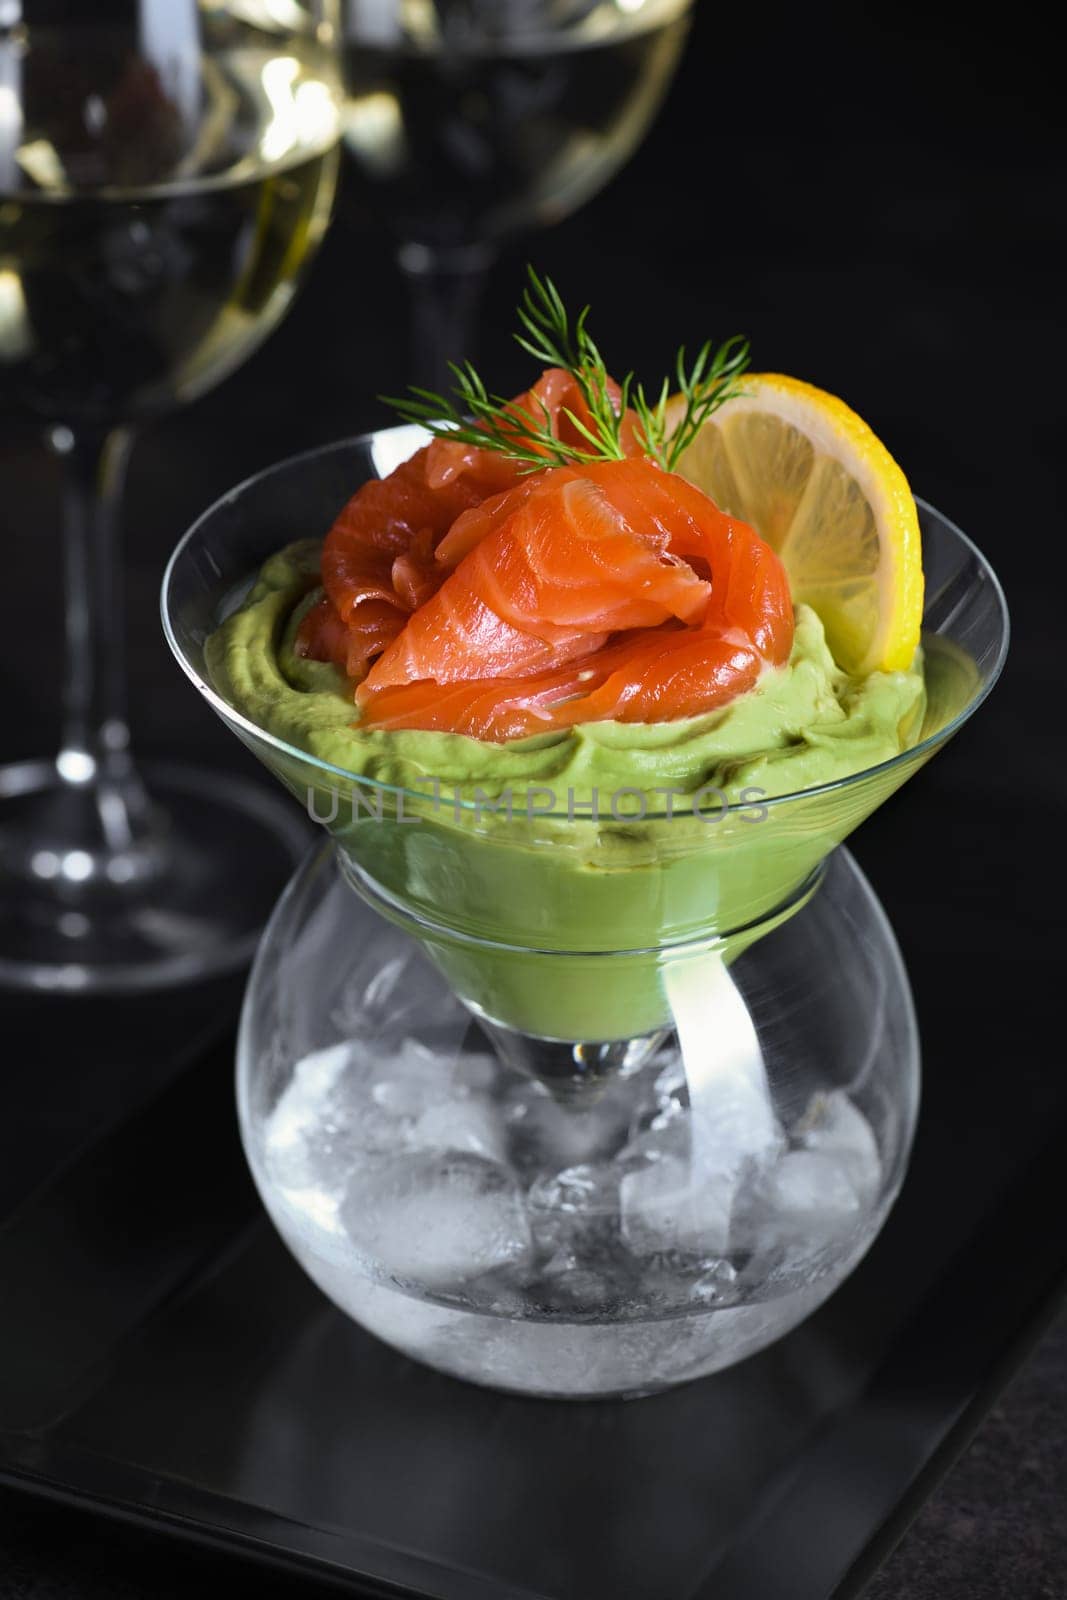 Taste is a combination of avocado pulp with a delicate texture of soft  cheese cream and salmon, with the addition of dill and a slice of lemon. Serving verrine in a Martini Chiller with ice. Aperitif appetizer